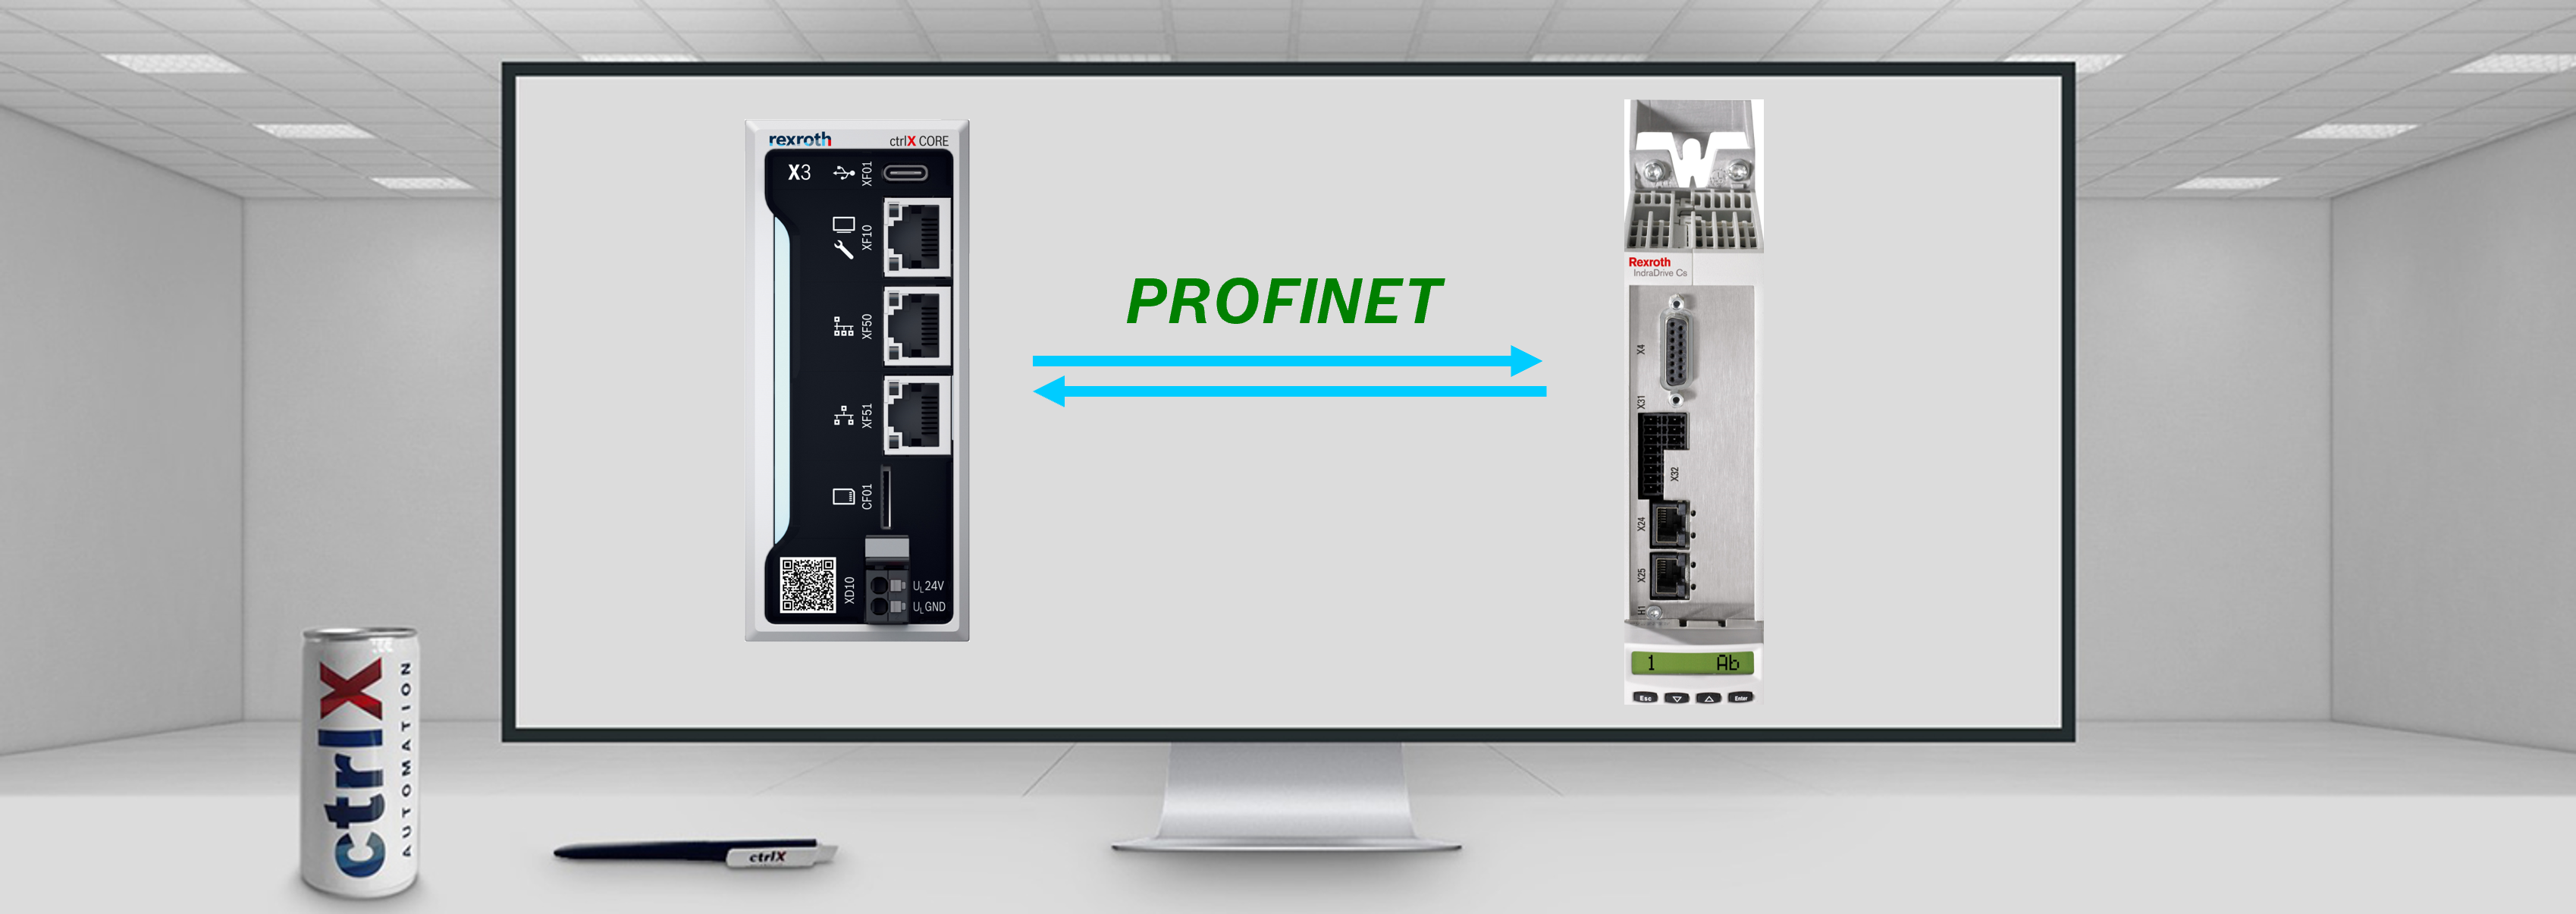 PROFINET ctrlX CORE X3 with IndraDrive using CoDeSys Fieldbus libraries